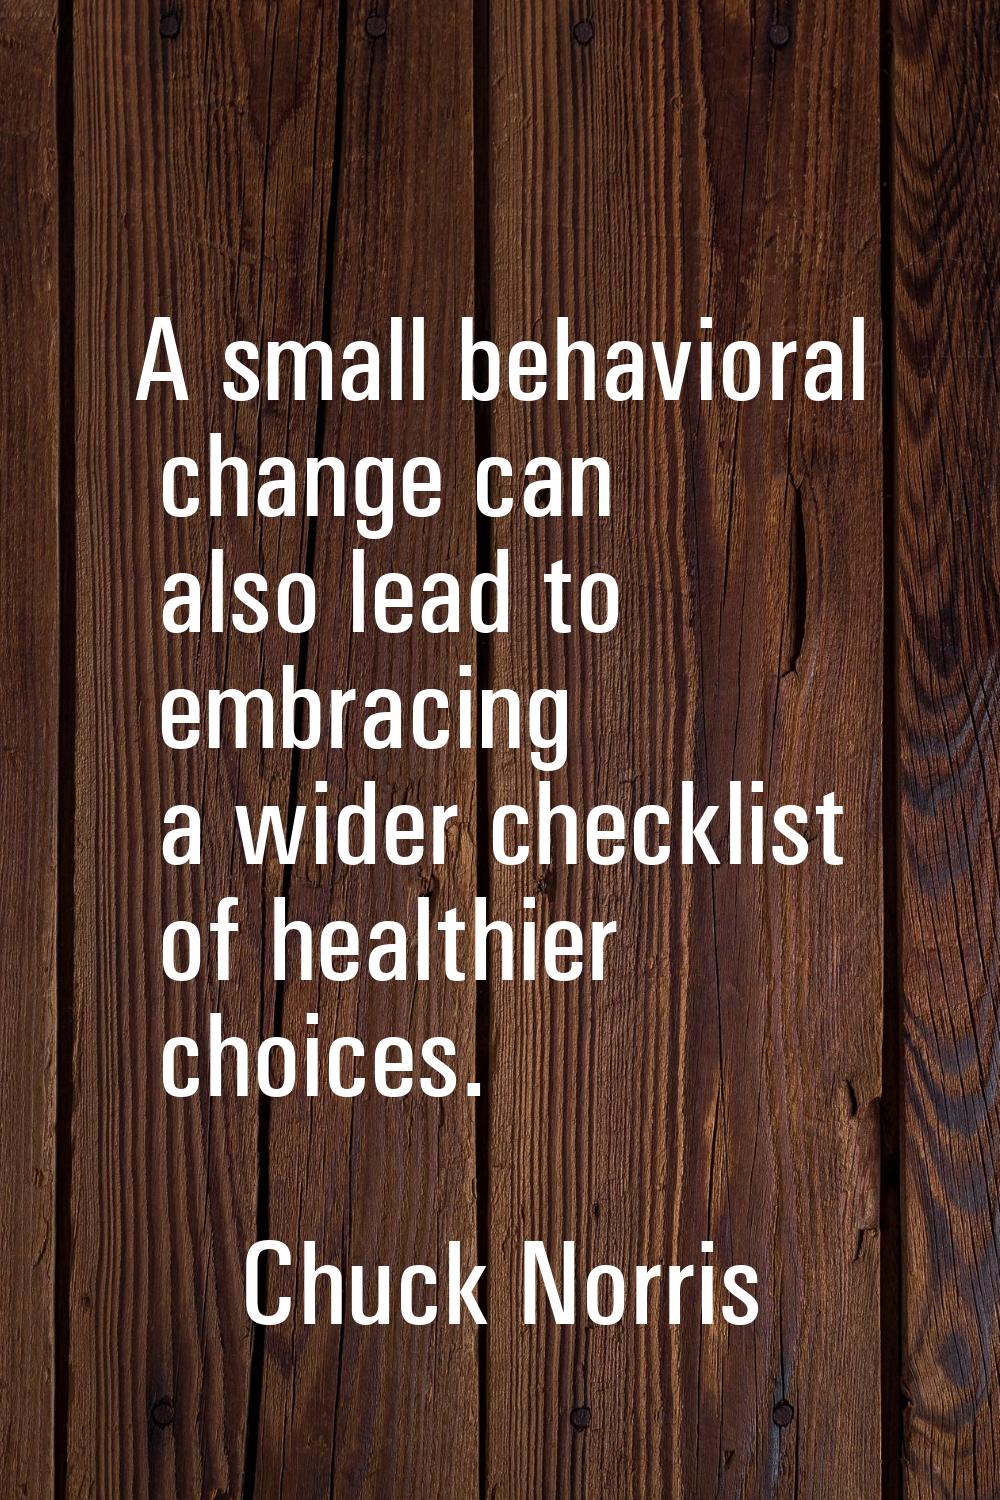 A small behavioral change can also lead to embracing a wider checklist of healthier choices.